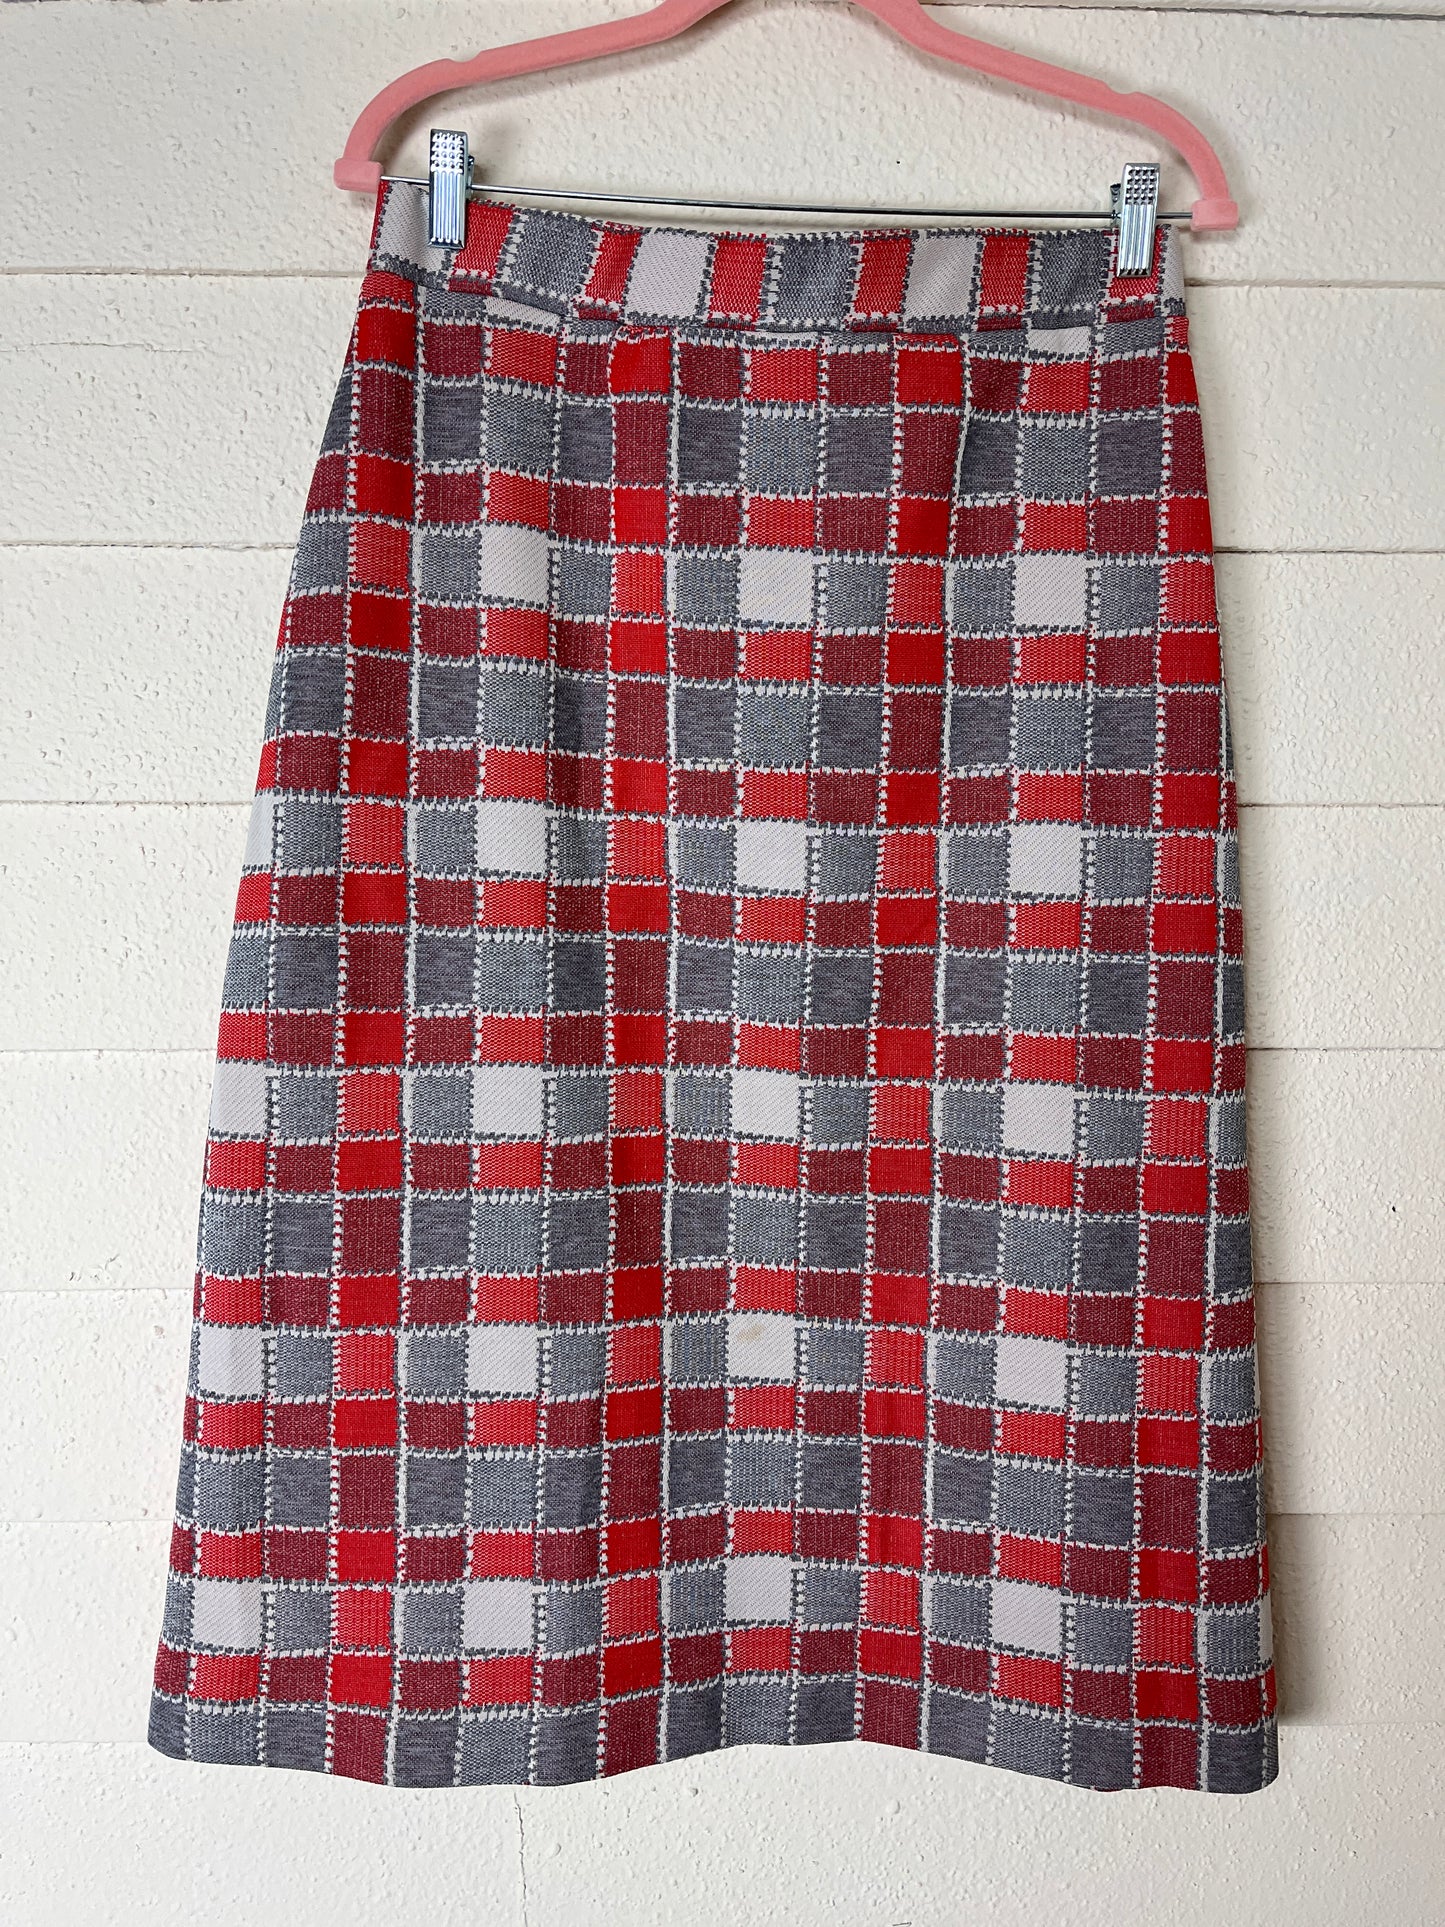 1970s GRAFF RED AND GRAY PLAID CHORE COAT AND ELASTIC WAIST SKIRT SET - size med to large